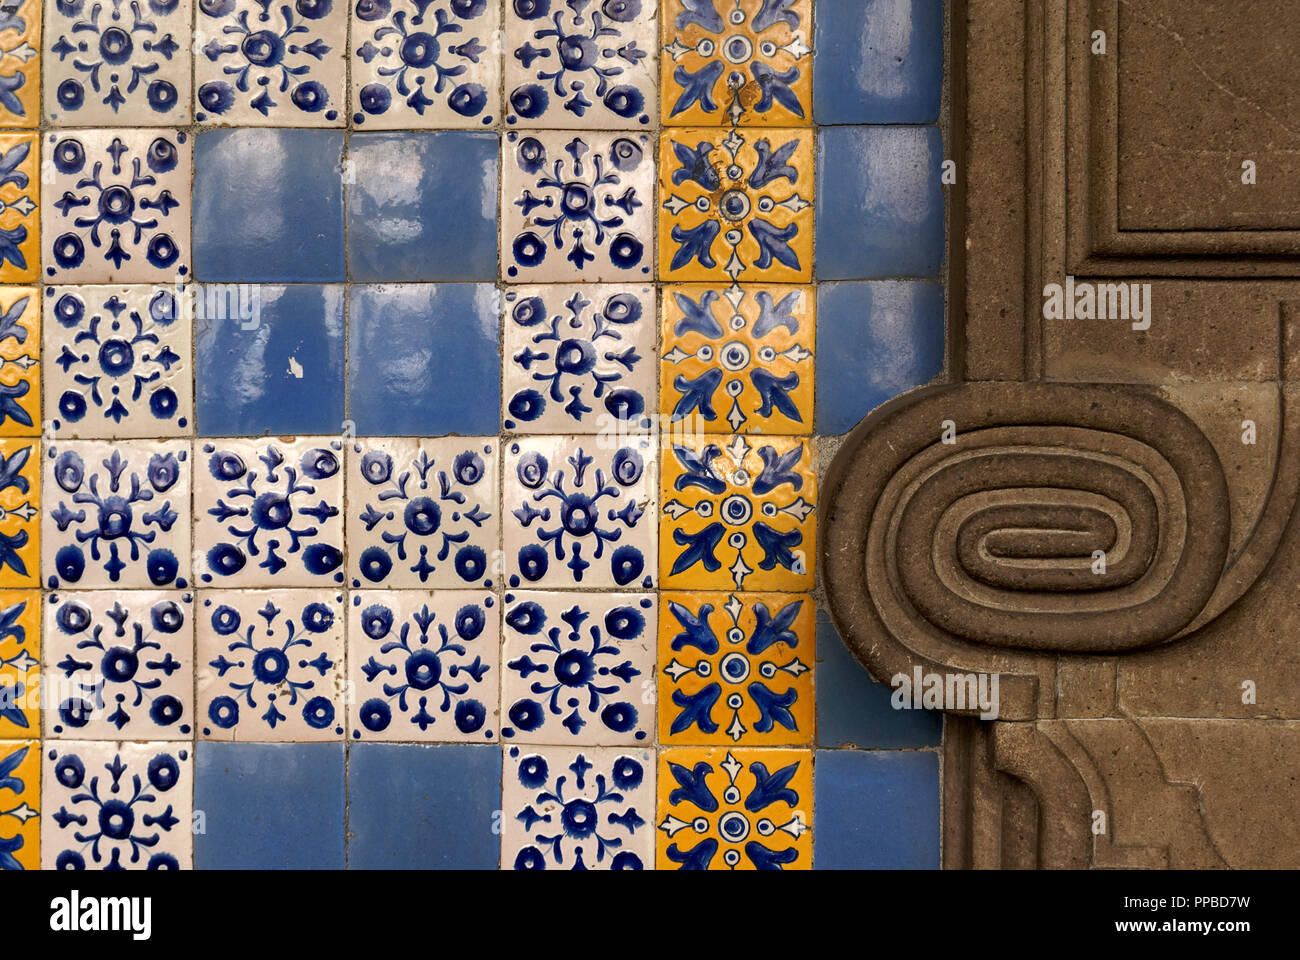 Spanish colonial tiles decorating the wall of a building in Centro Historico, Mexico City, Mexico Stock Photo